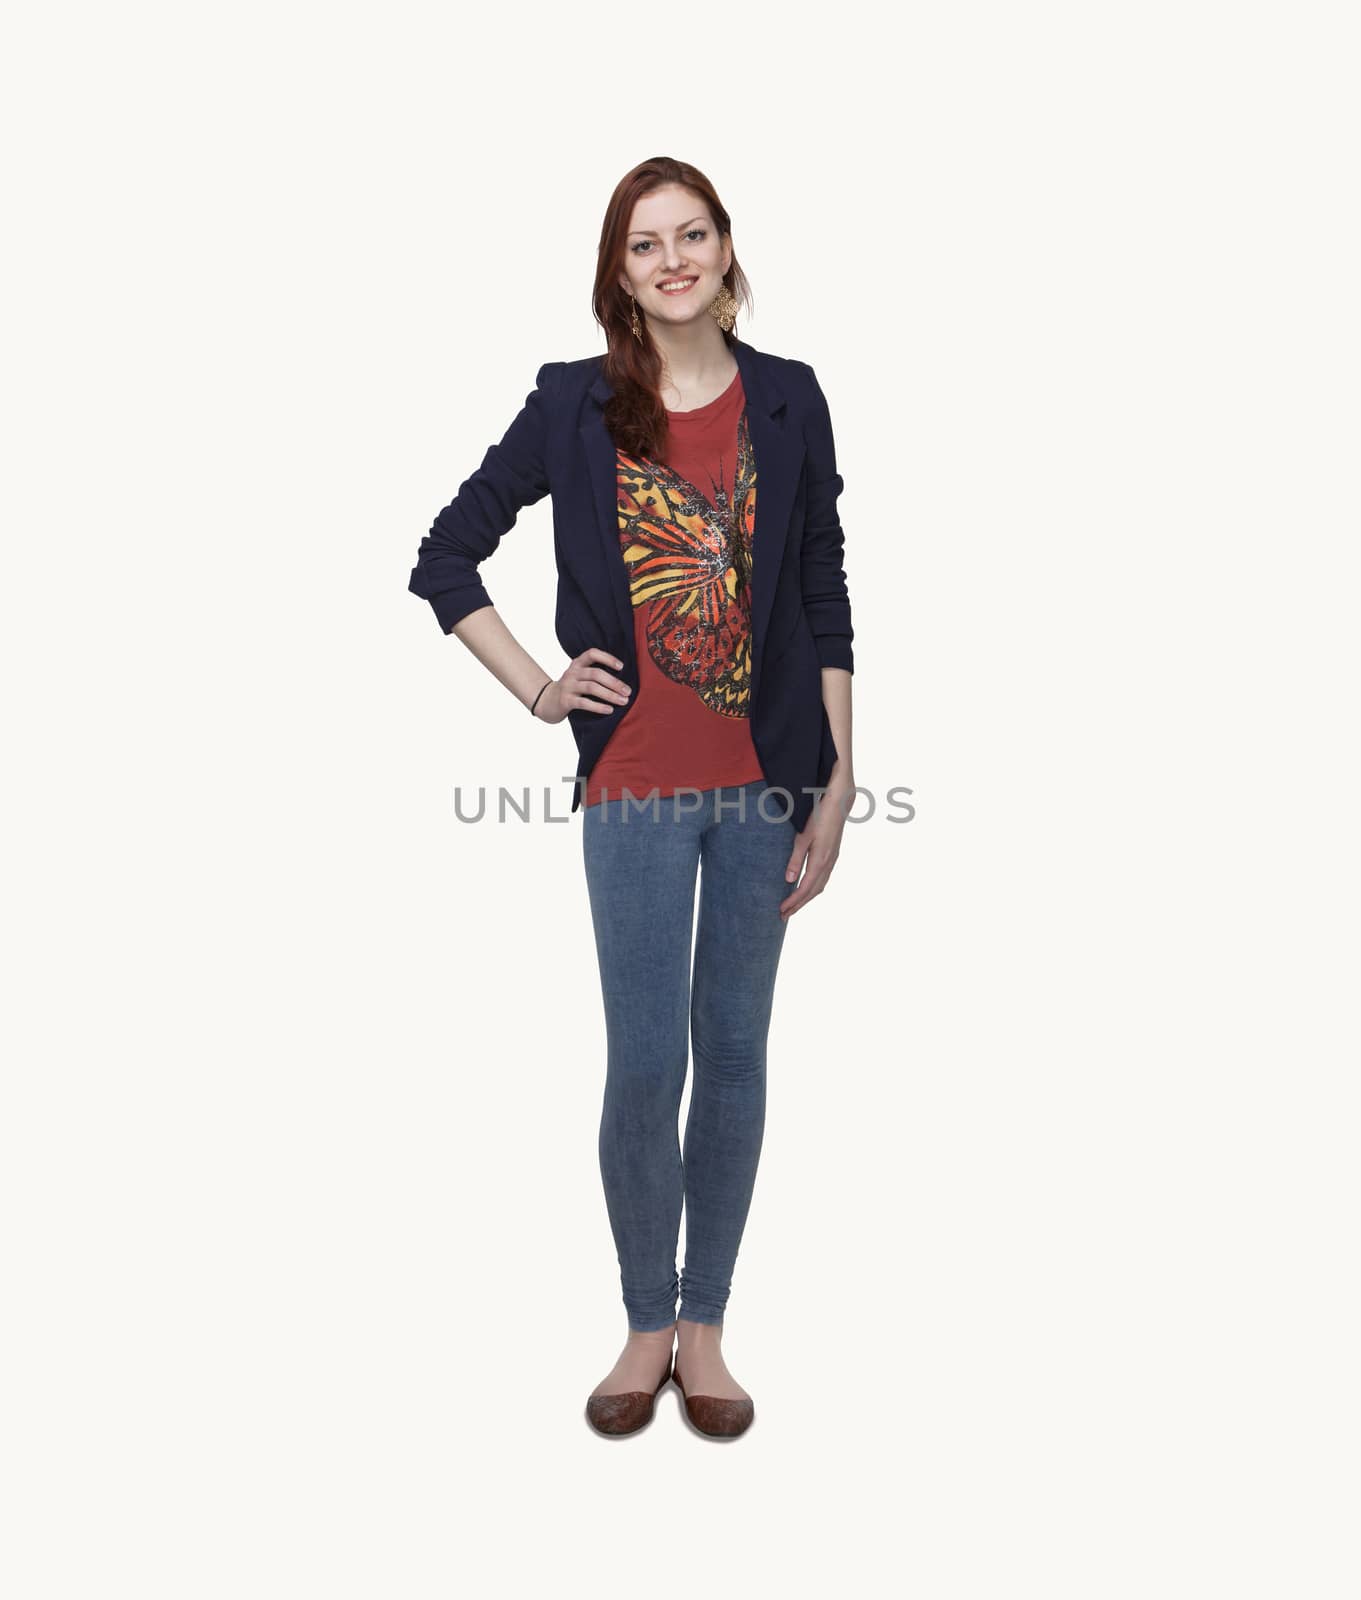 Portrait of smiling young woman in casual clothing, hand on hip, full length, studio shot